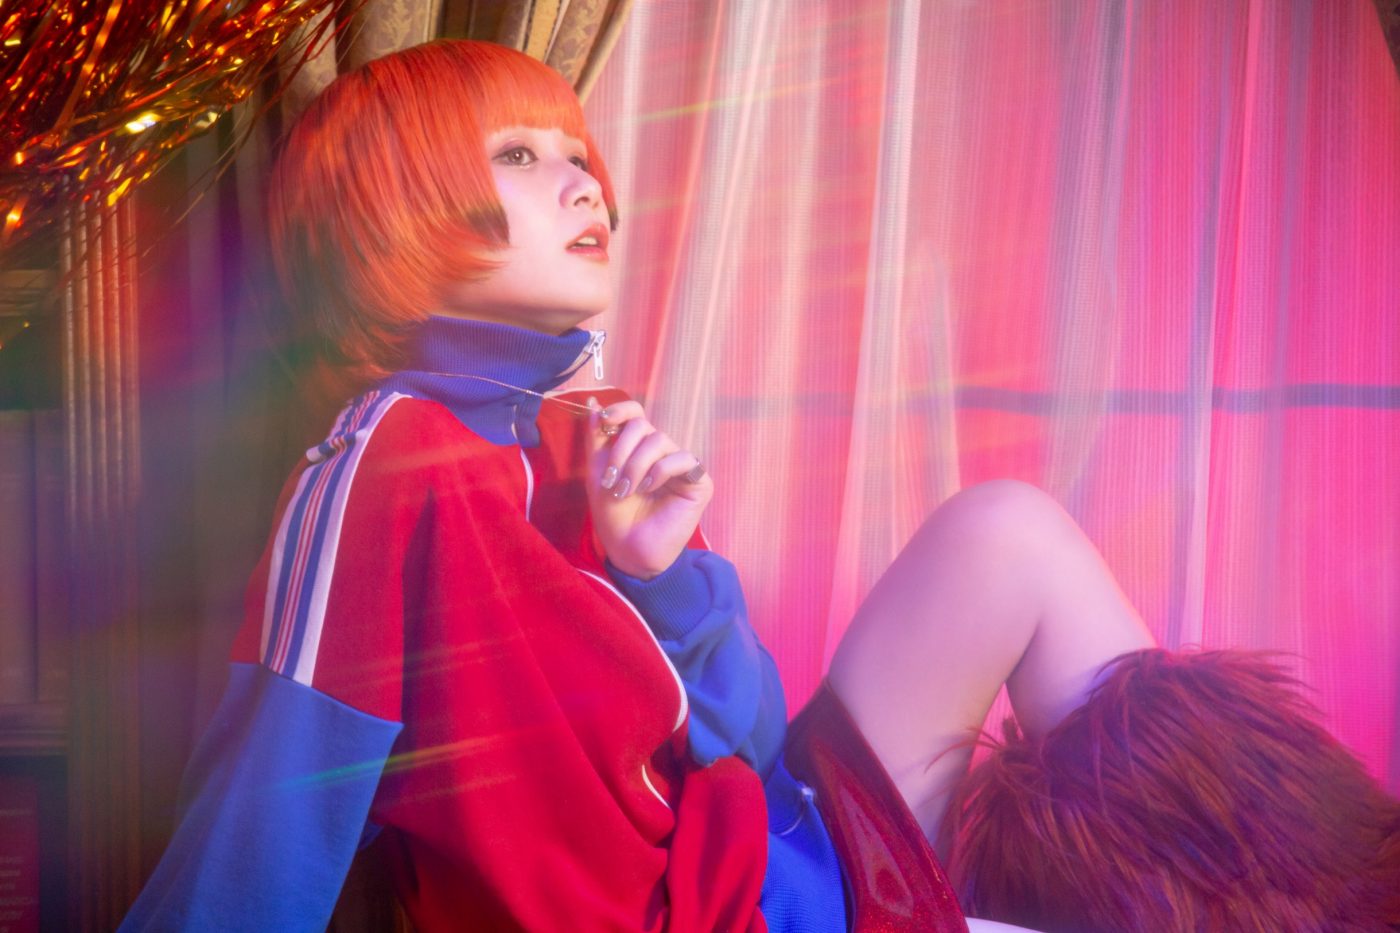 Reol、「COLORED DISC」のクロスフェード映像を公開。誕生日にYouTube生配信も - 画像一覧（3/3）